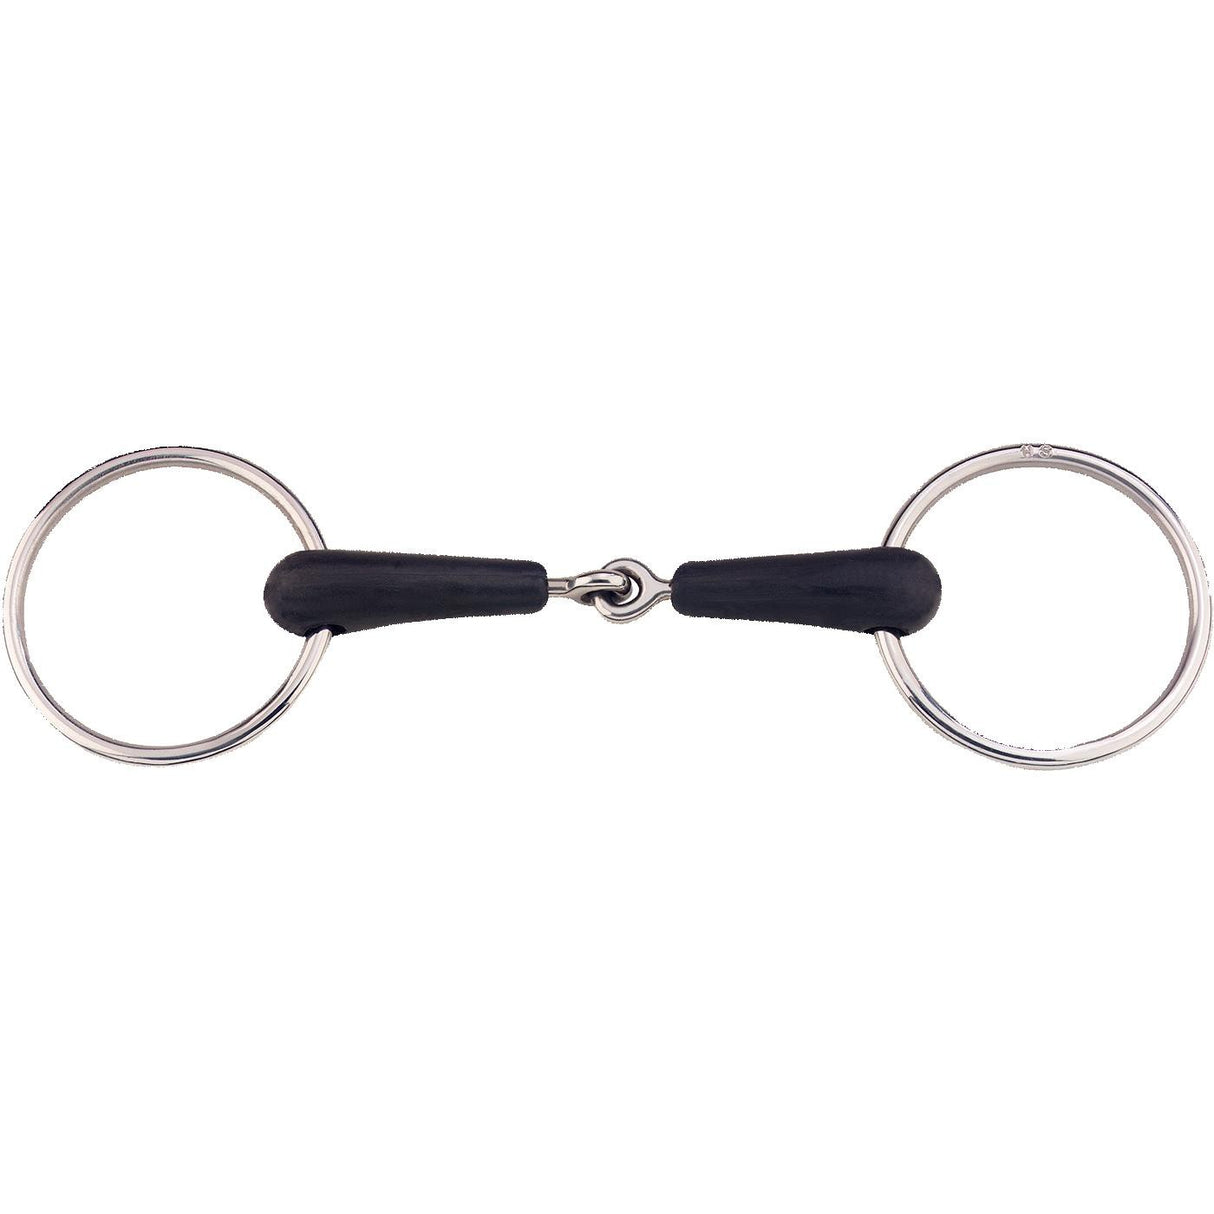 Sprenger Loose Ring Single Jointed Snaffle Bit - 18 mm